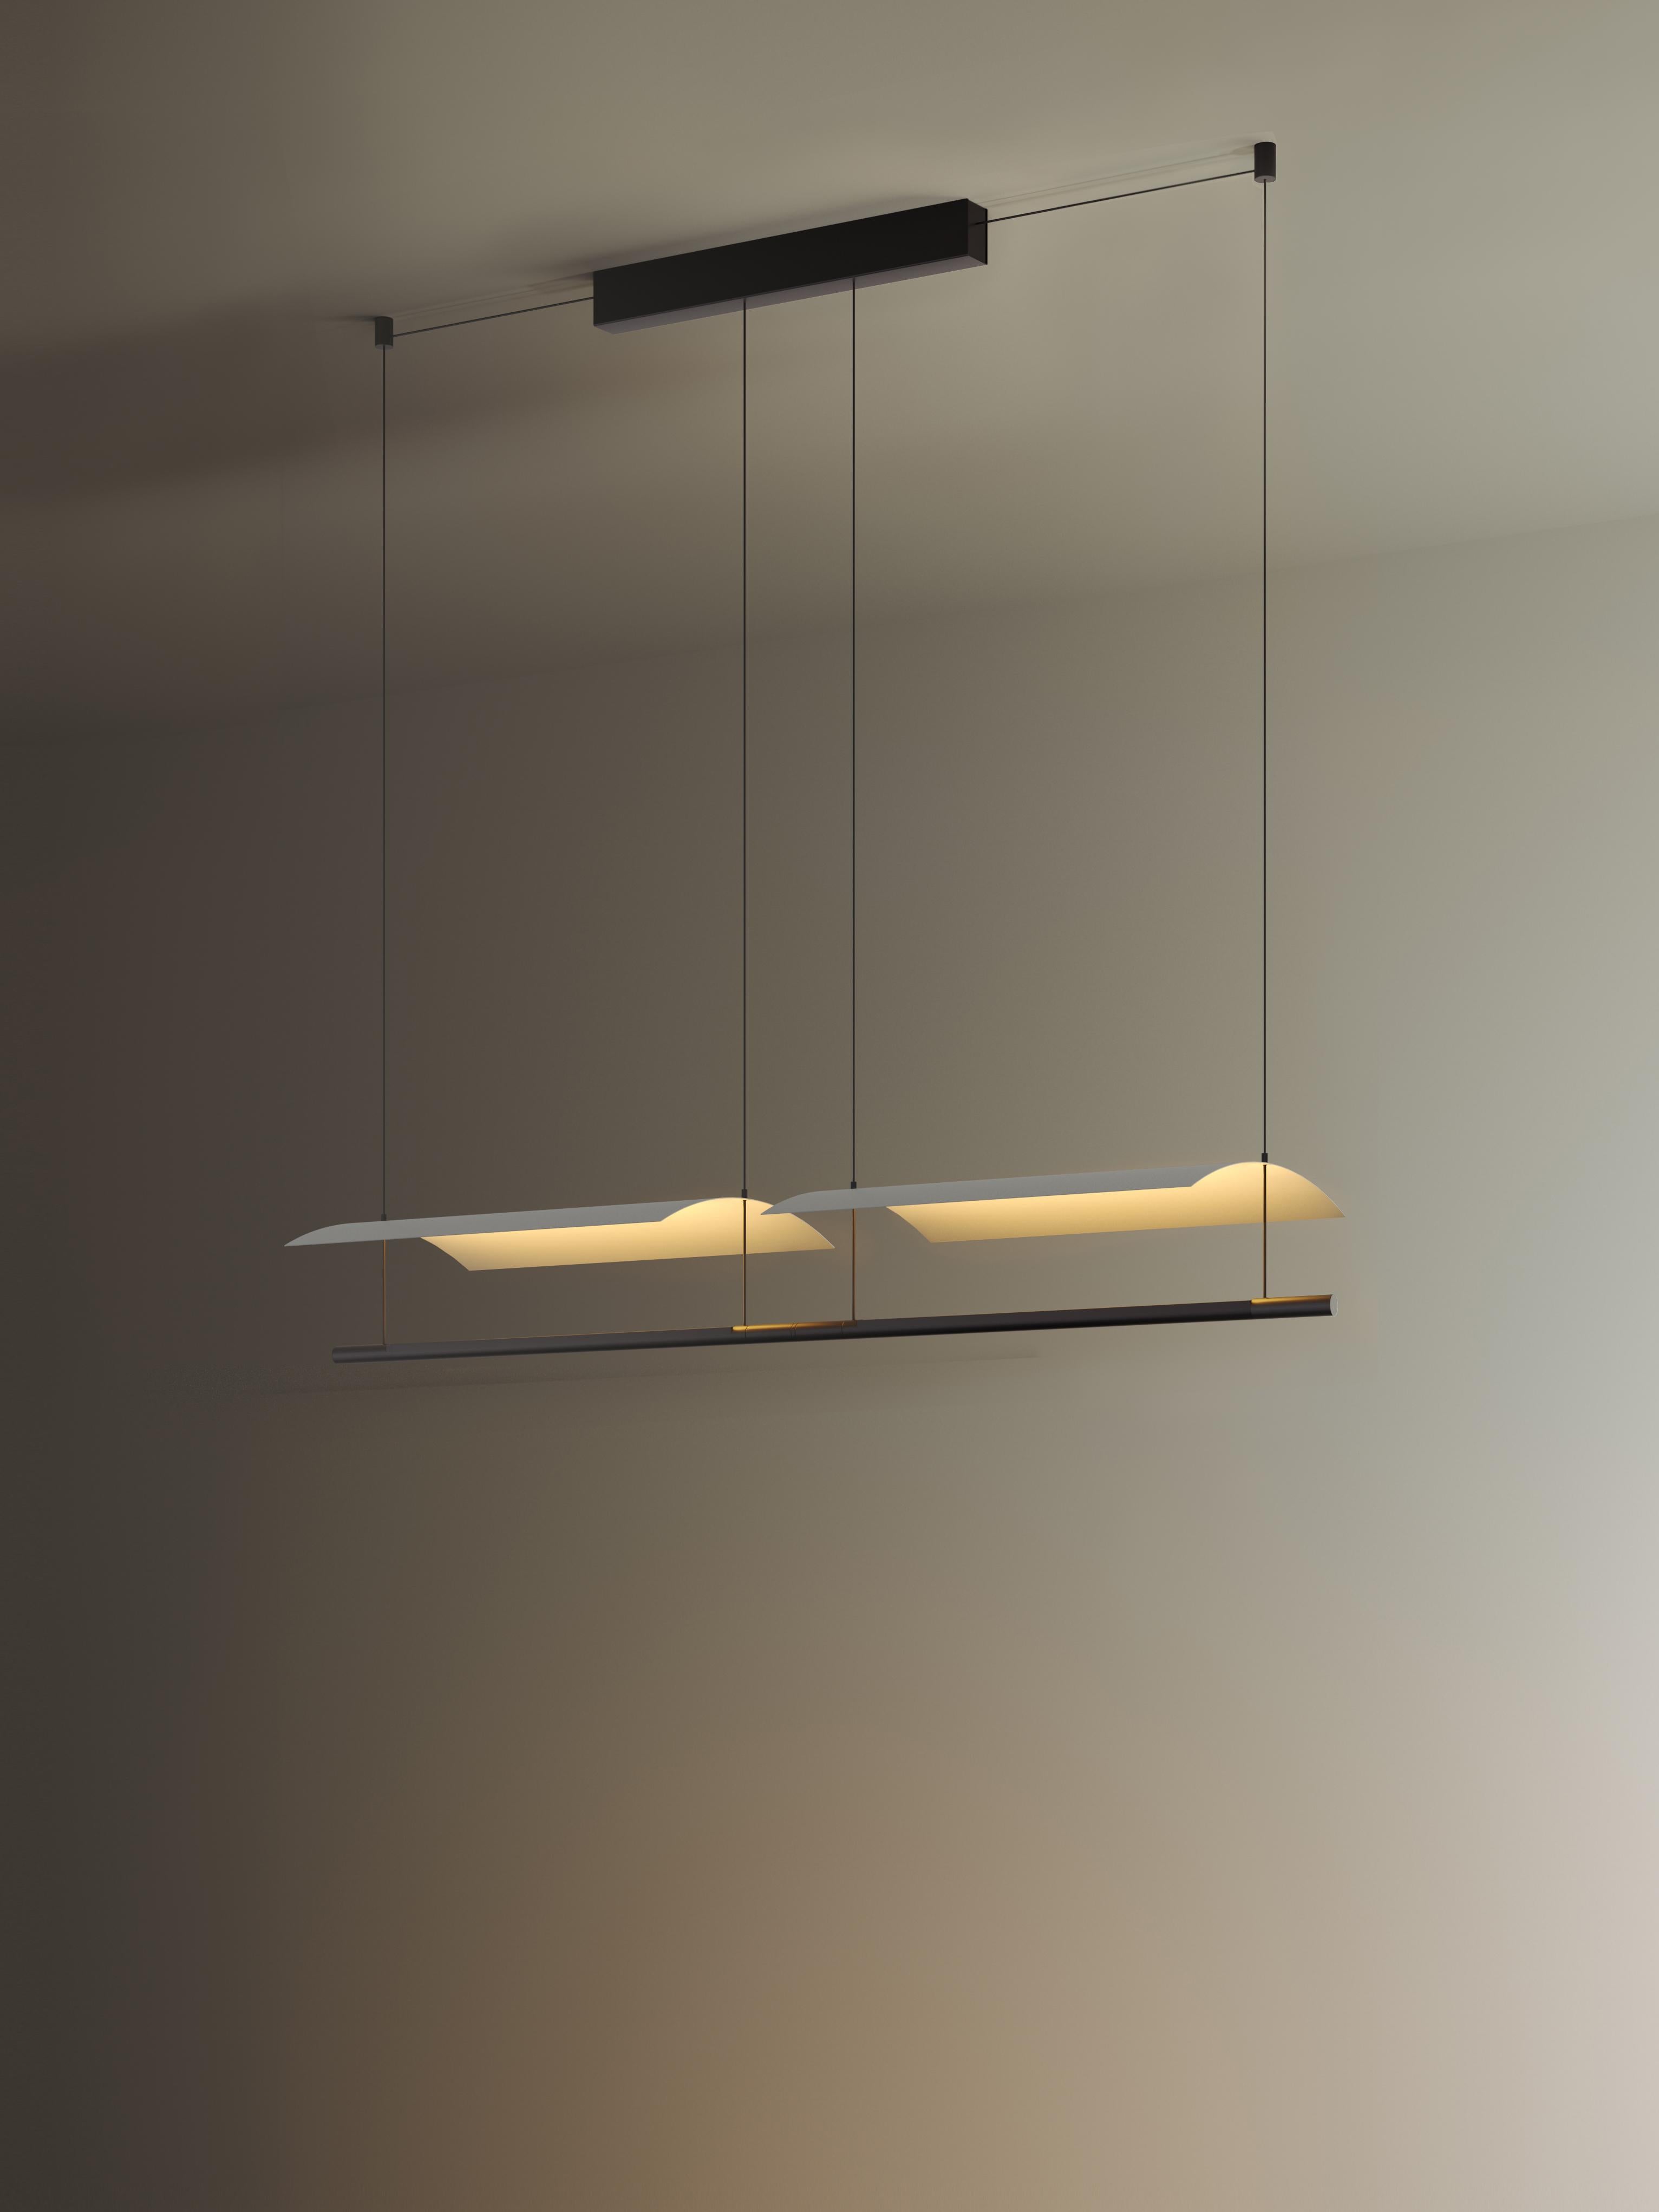 Lámina 45 pendant lamp by Antoni Arola
Dimensions: d 47.5 x w 30 x h 12.6 cm
Materials: Metal, plastic.
Available in other sizes.

A line of light and a thin metal sheet create a soft but effective levity. A marriage of the poetic and the